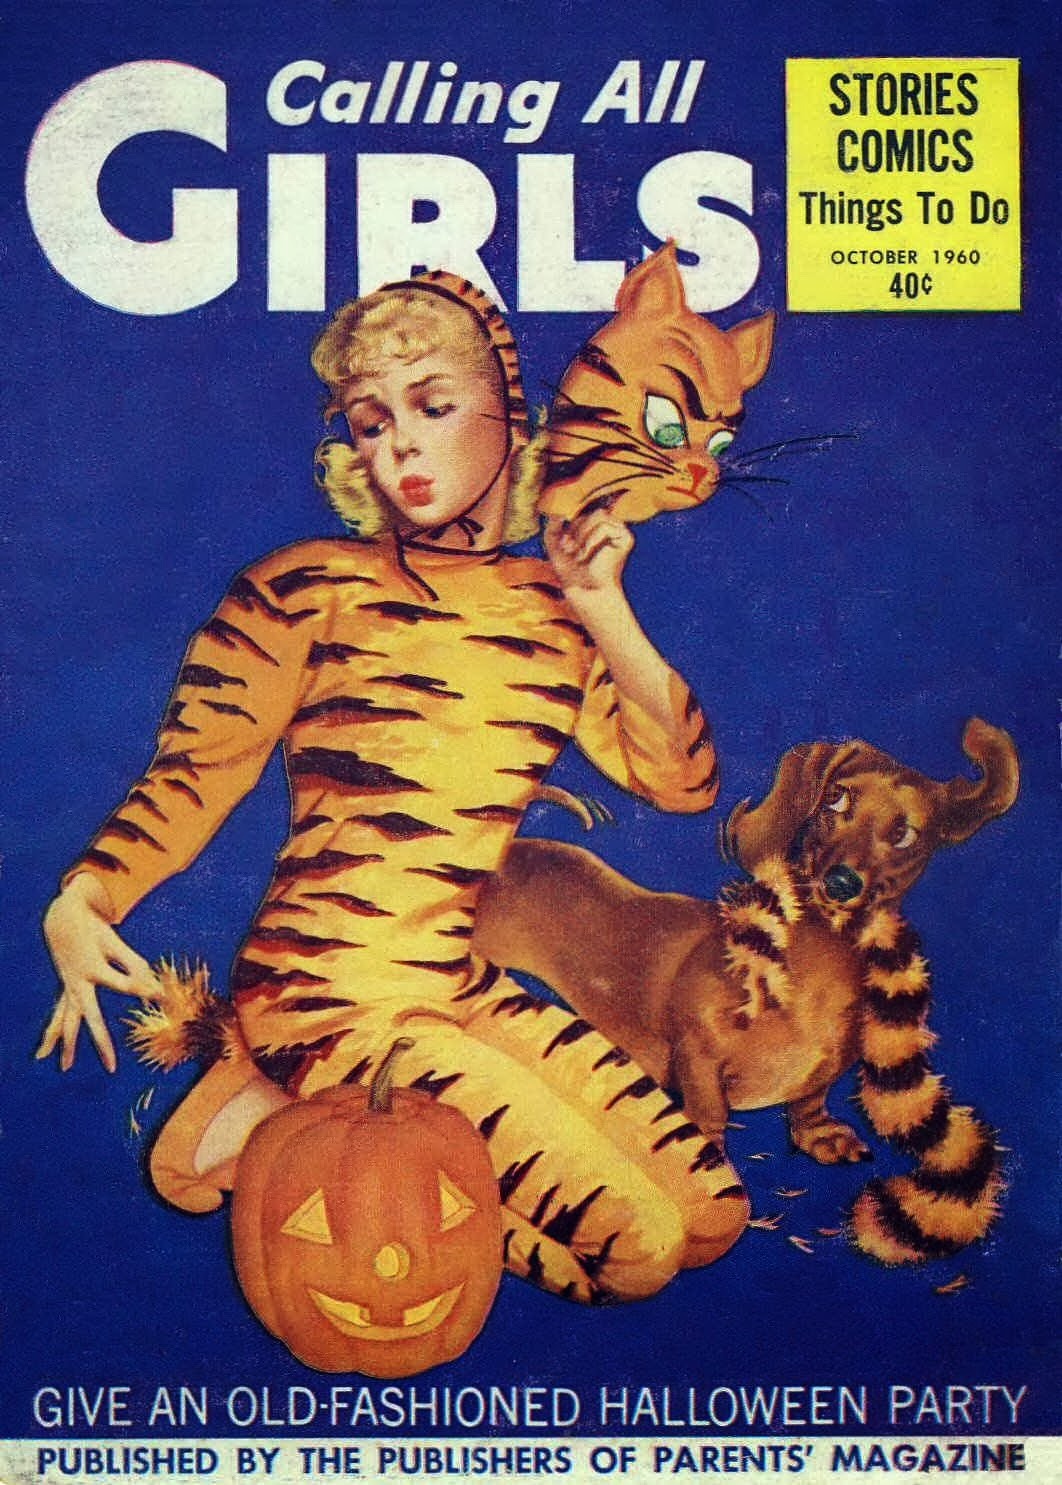 Calling all Girls - published October 1960